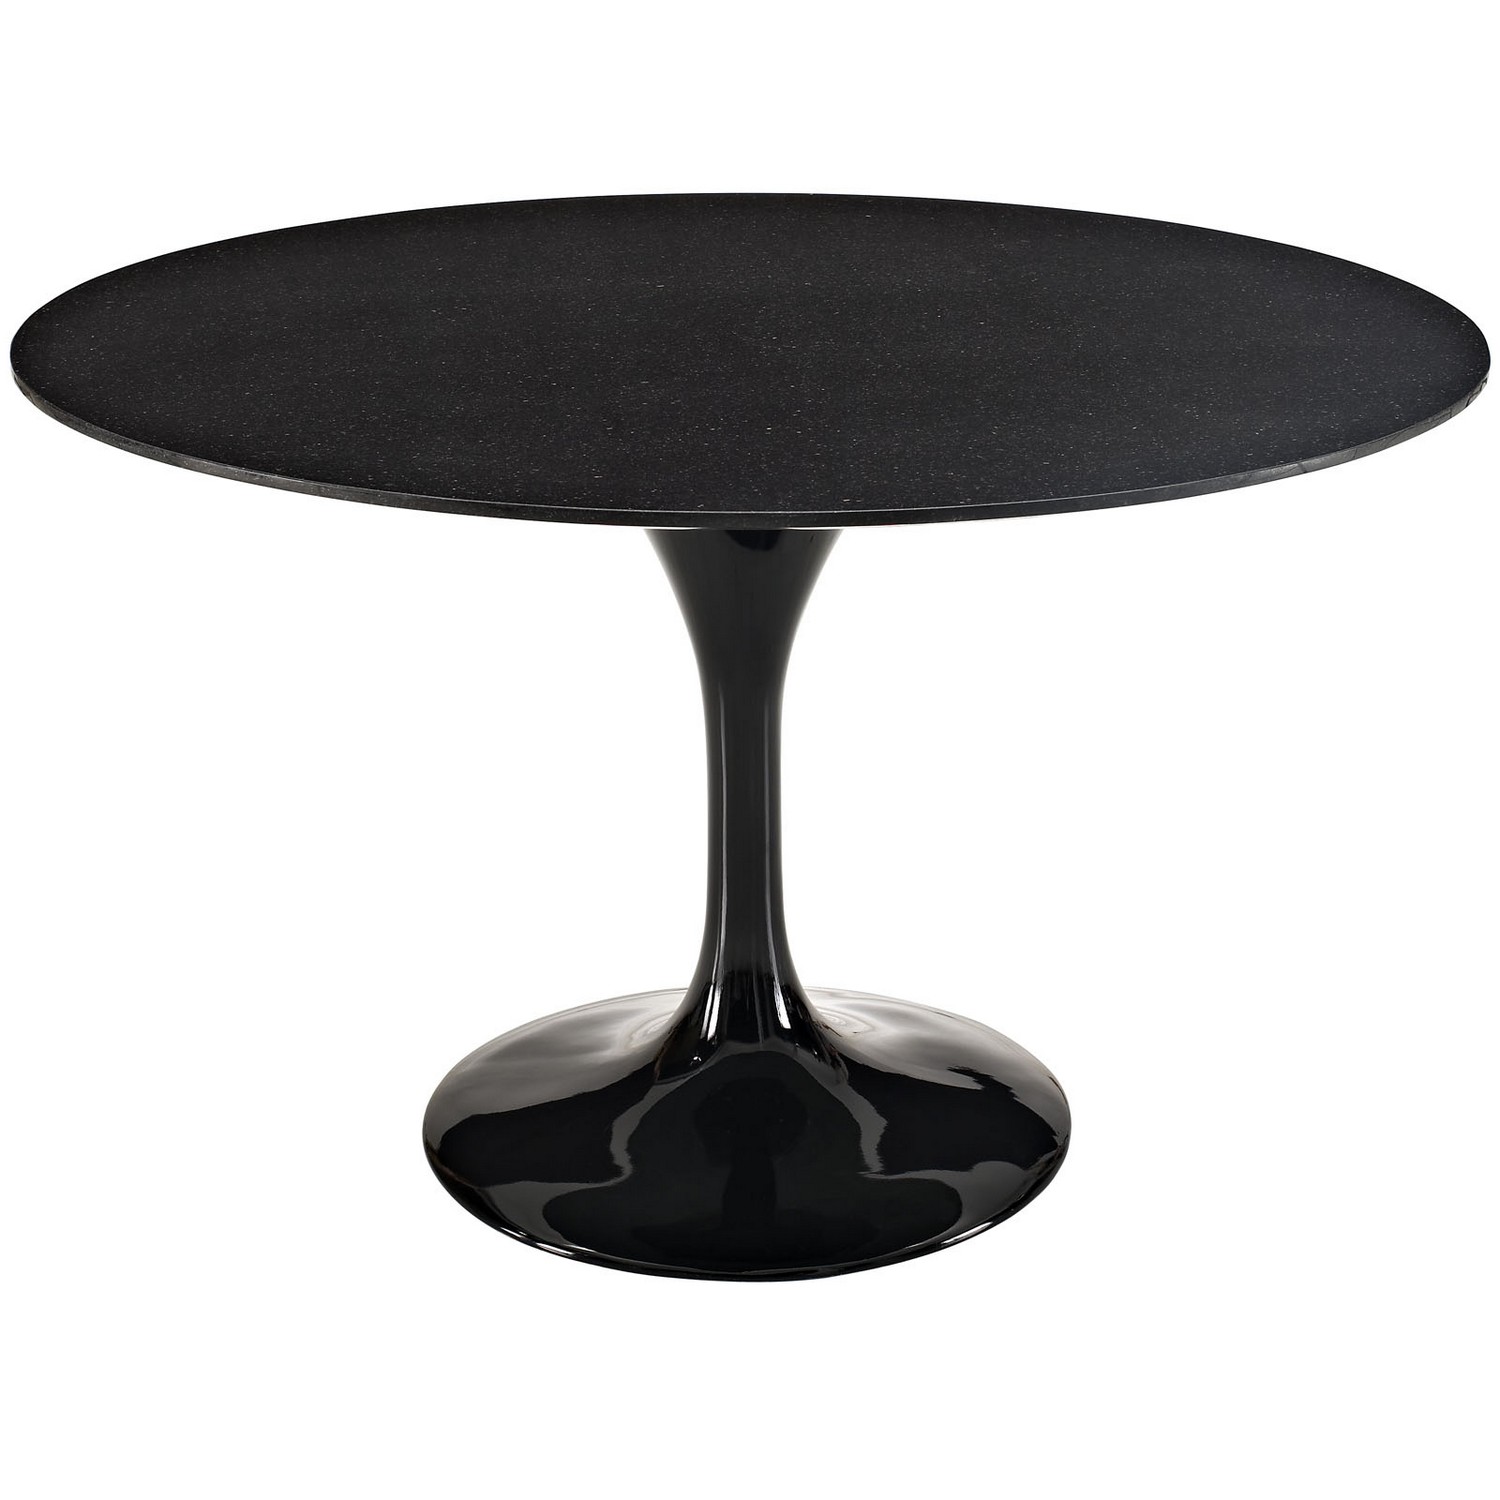 Modway Lippa 48 Marble Dining Table - Black